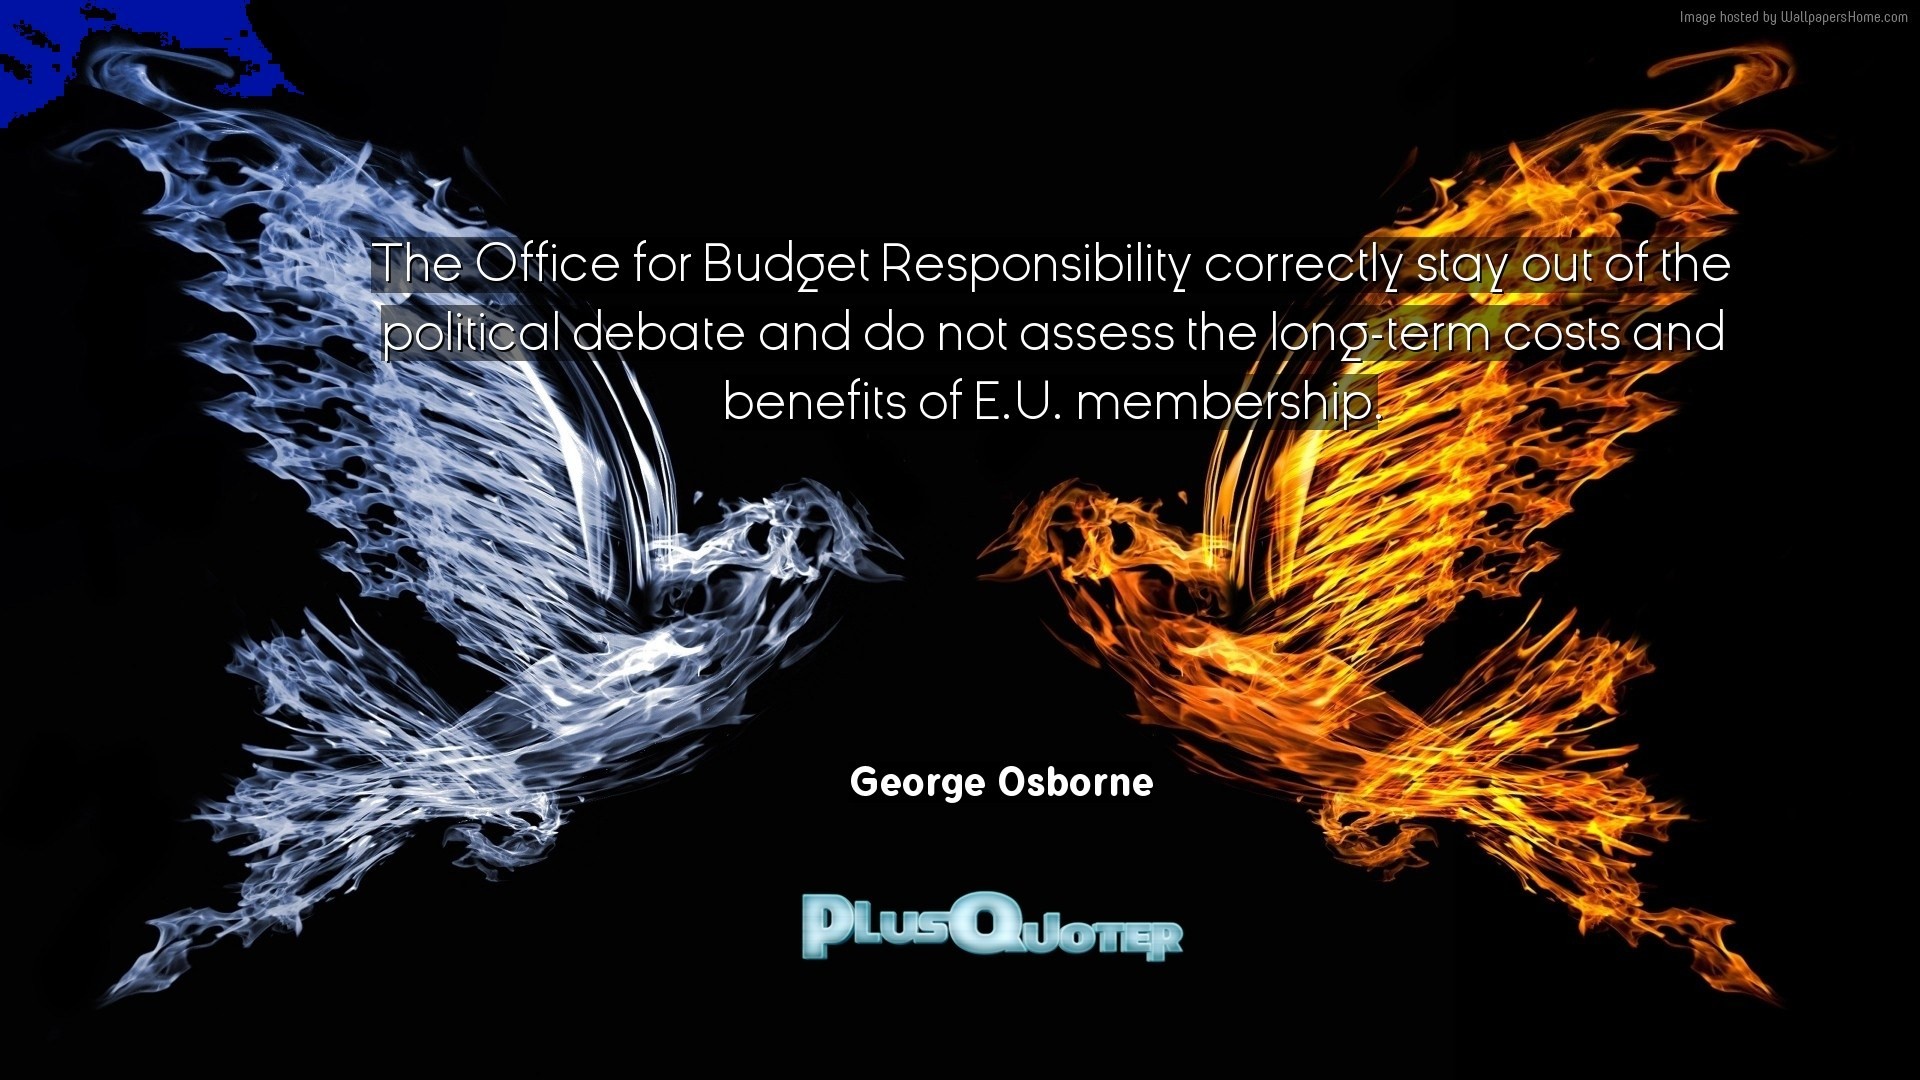 1920x1080 Download Wallpaper with inspirational Quotes- "The Office for Budget  Responsibility correctly stay out of